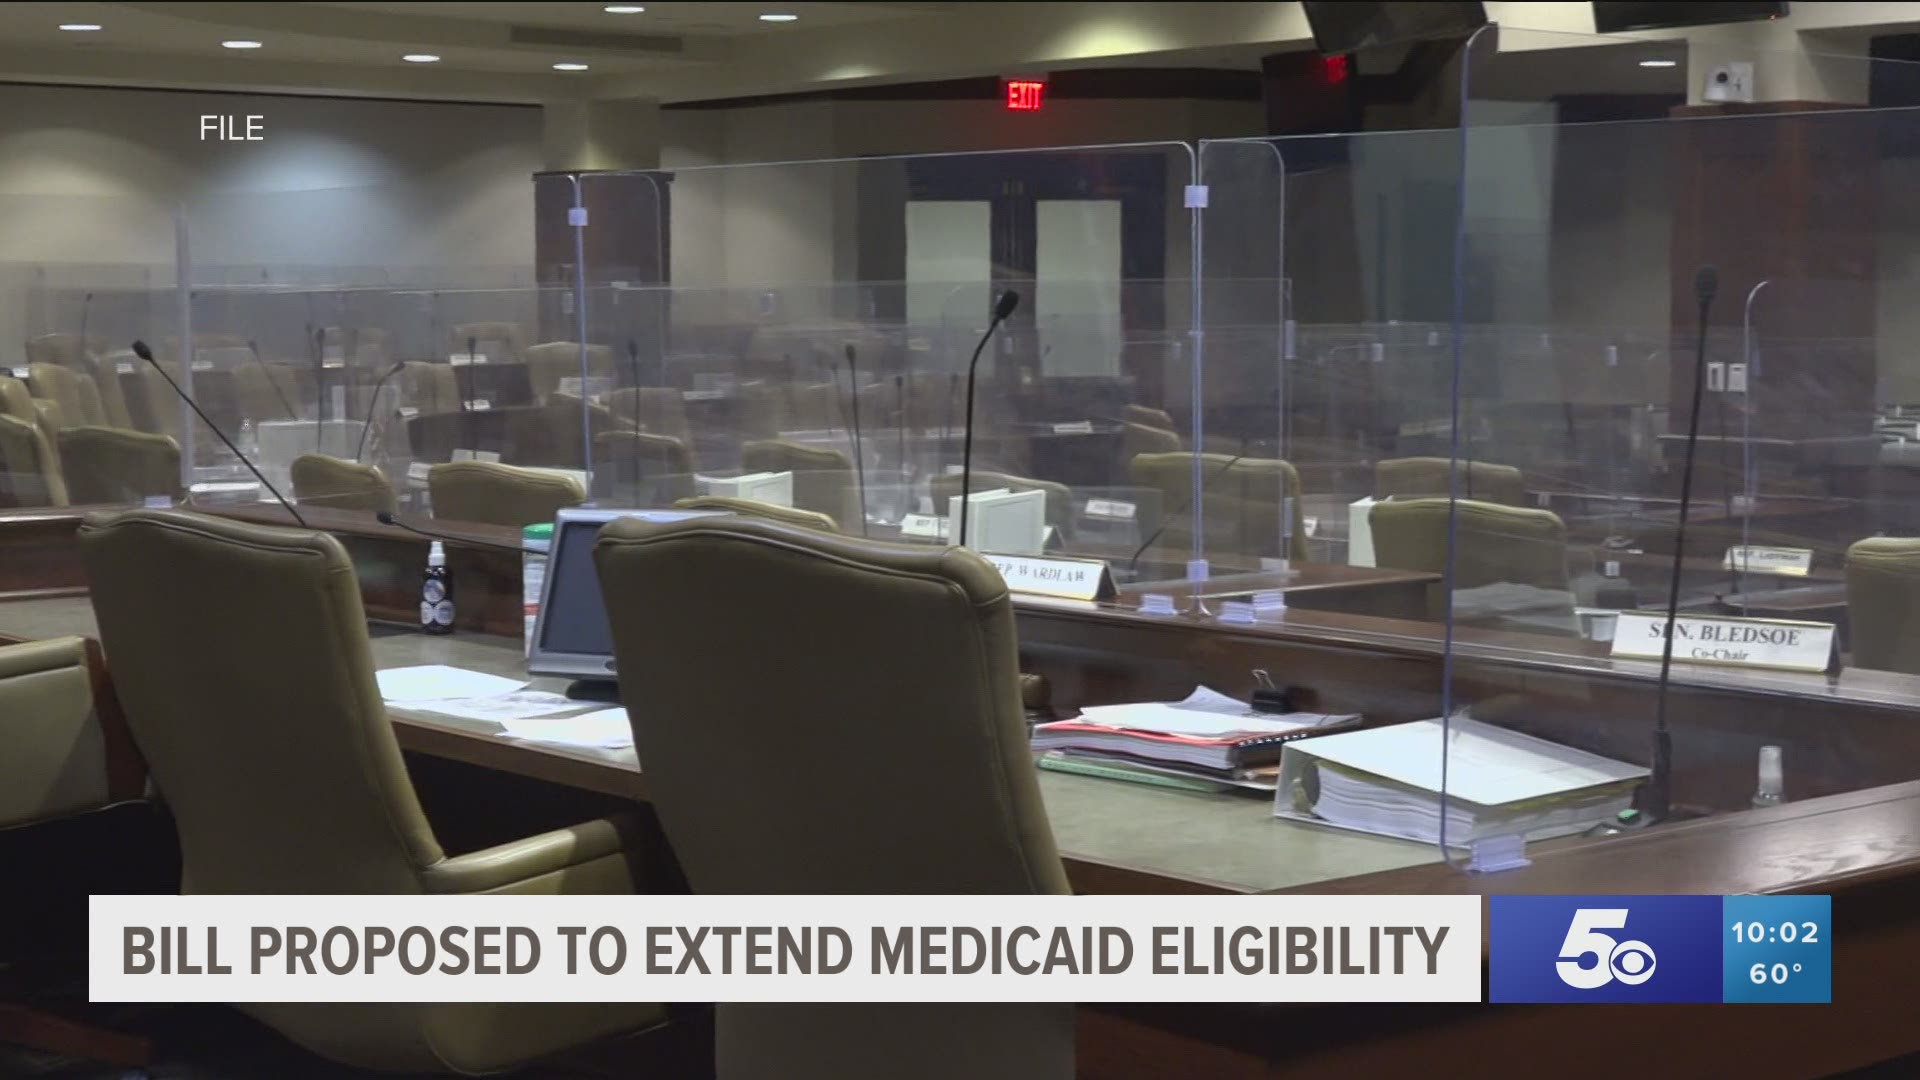 Bill proposed to extend Medicaid eligibility in Arkansas